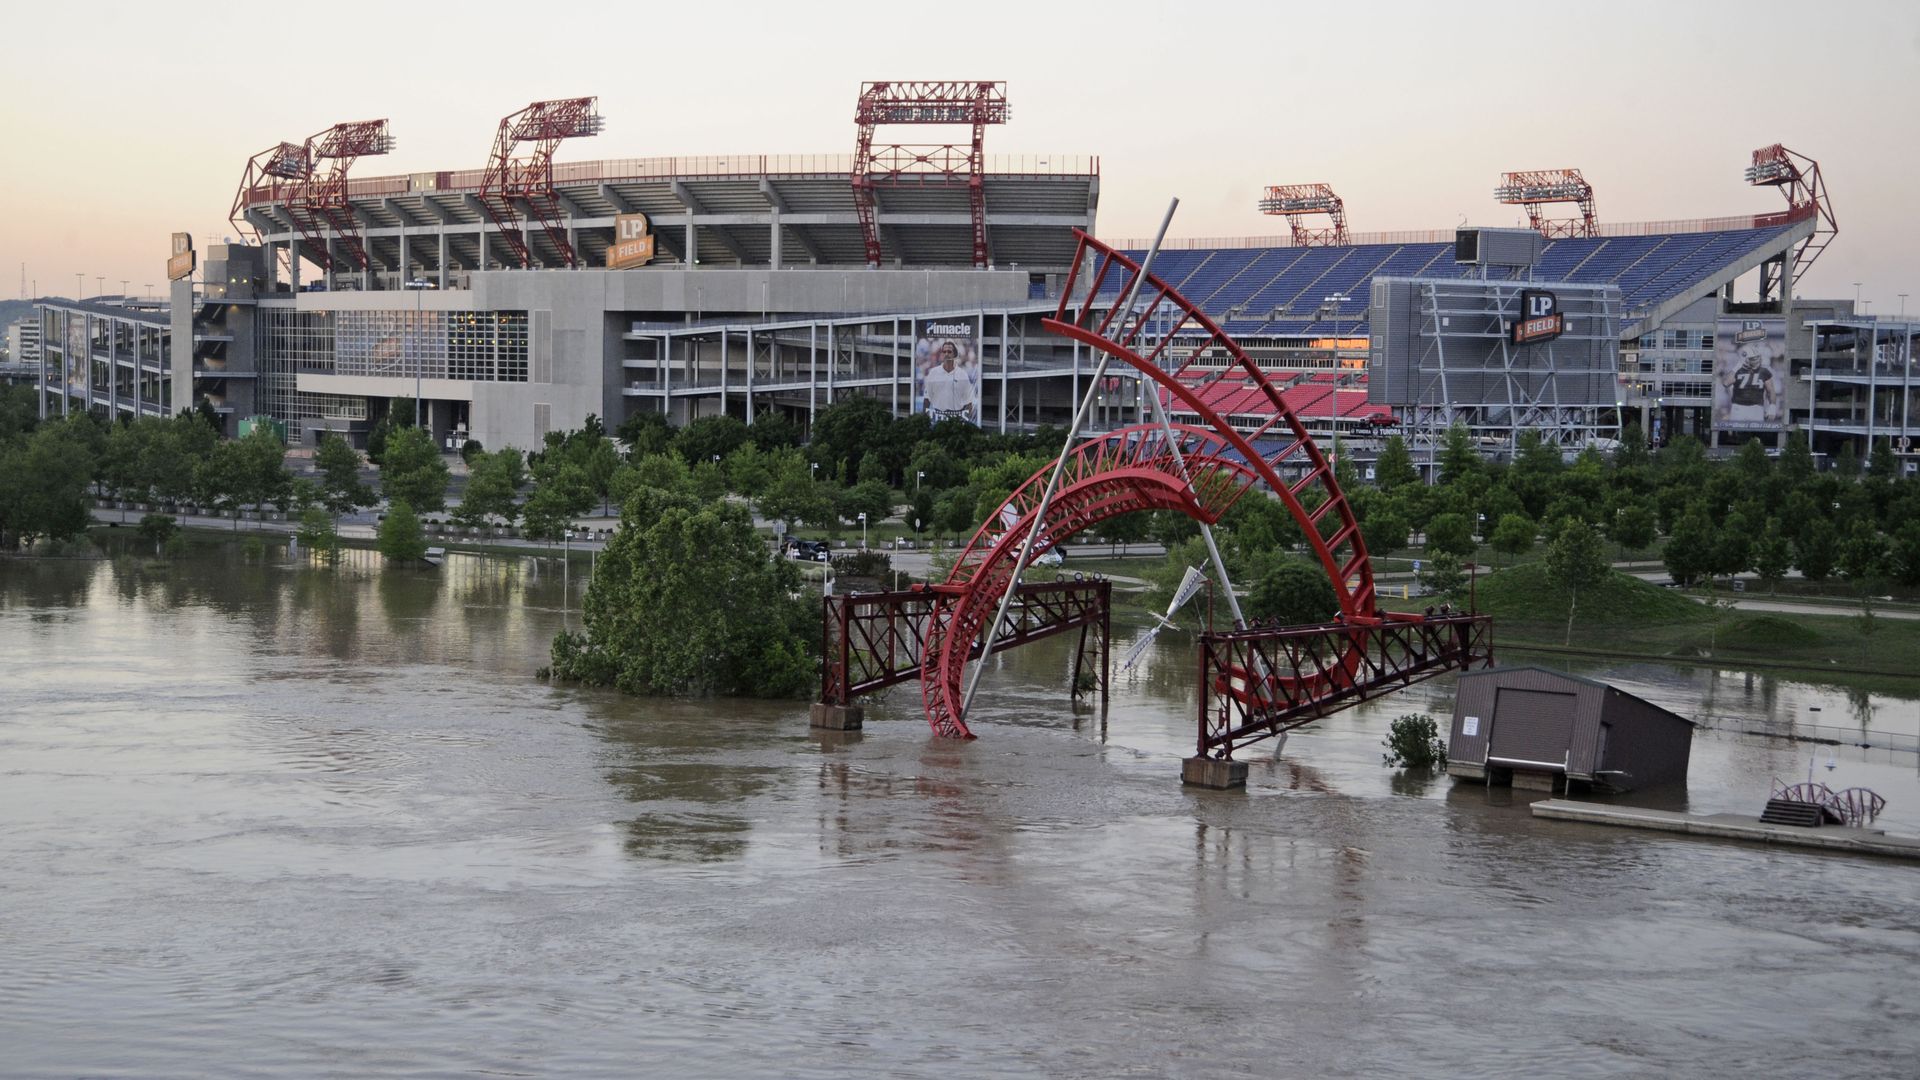 Floodwater surrounding the Titans stadium during the 2010 flood.